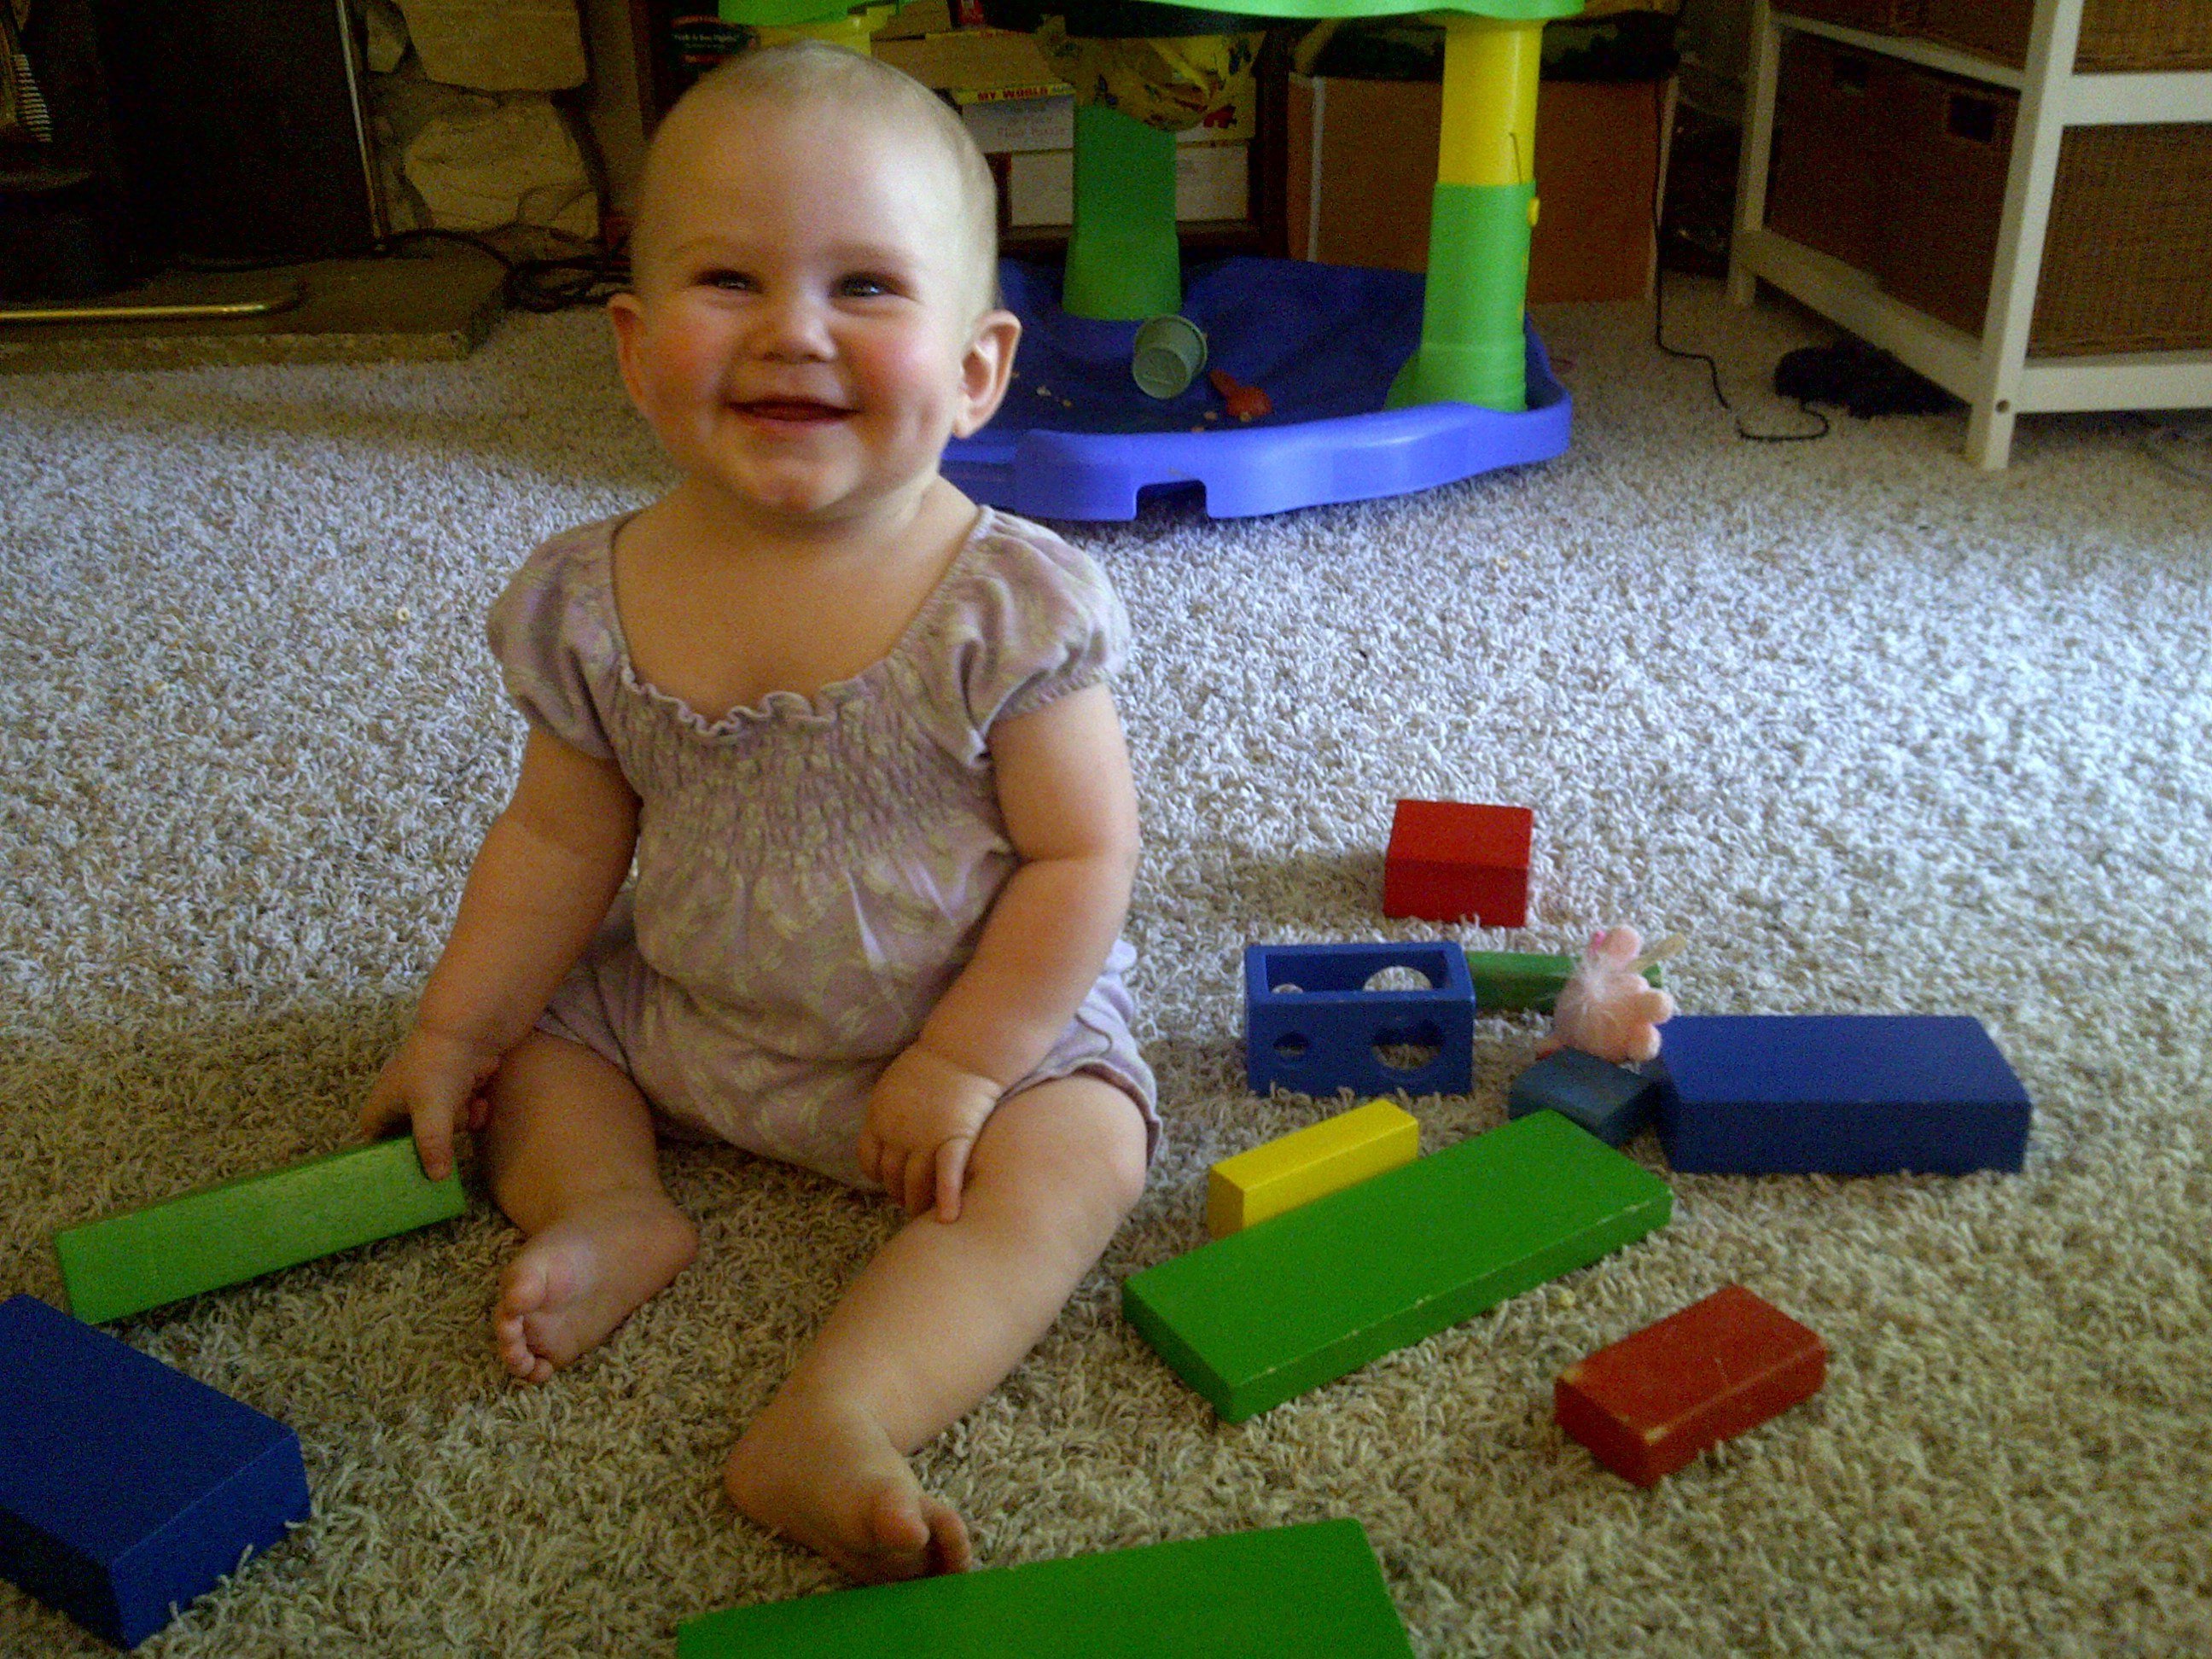 not making the milk sign, but still damn cute playing with blocks